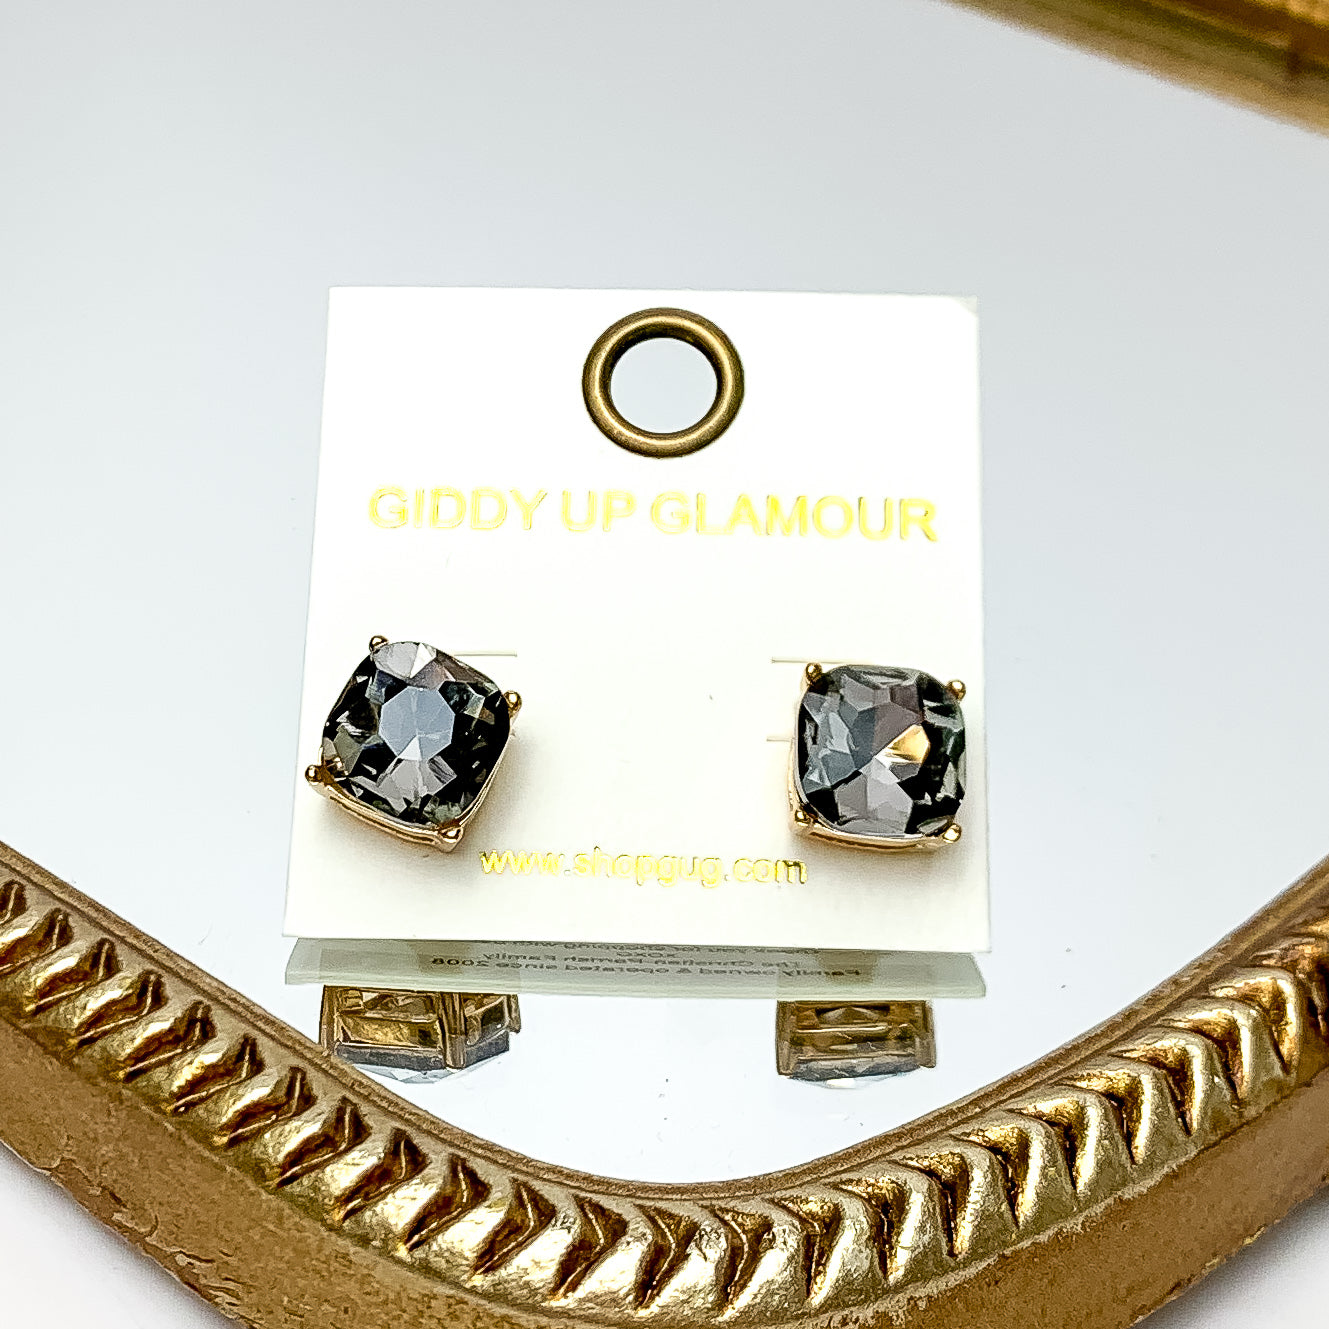 Large Crystal Stud Earrings in Grey. These earrings are pictured laying on a gold trimmed mirror.